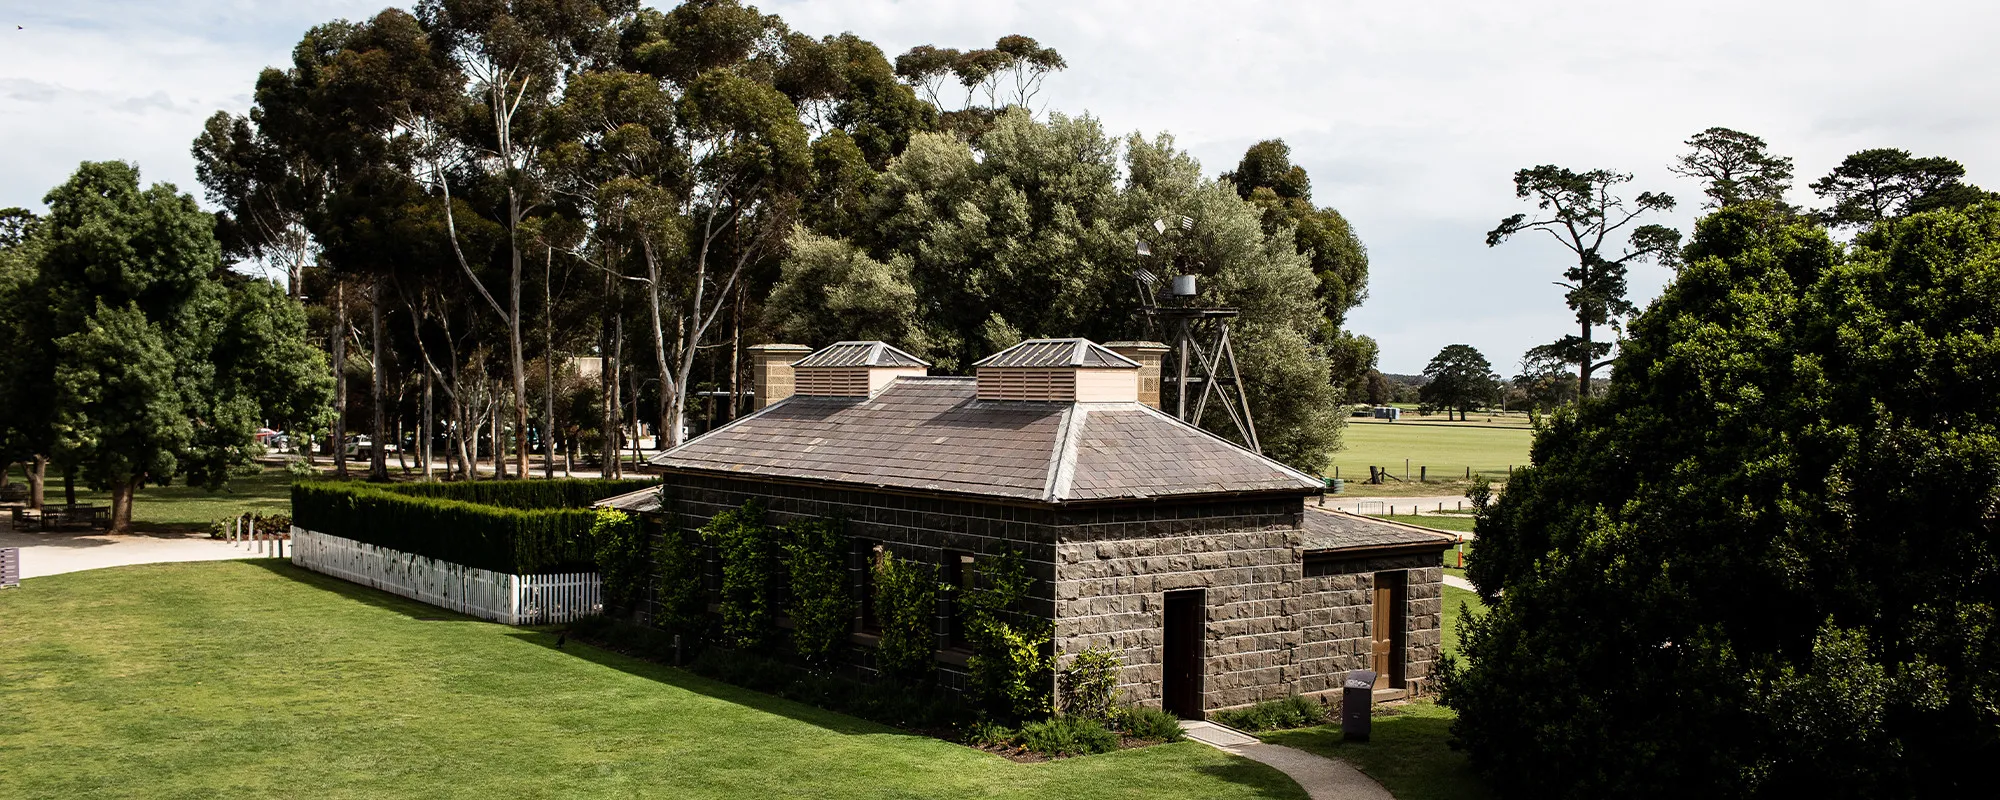 Lancemore Mansion Hotel Werribee Park Boutique Luxury Accommodation Facility grounds 2000 x 800 7